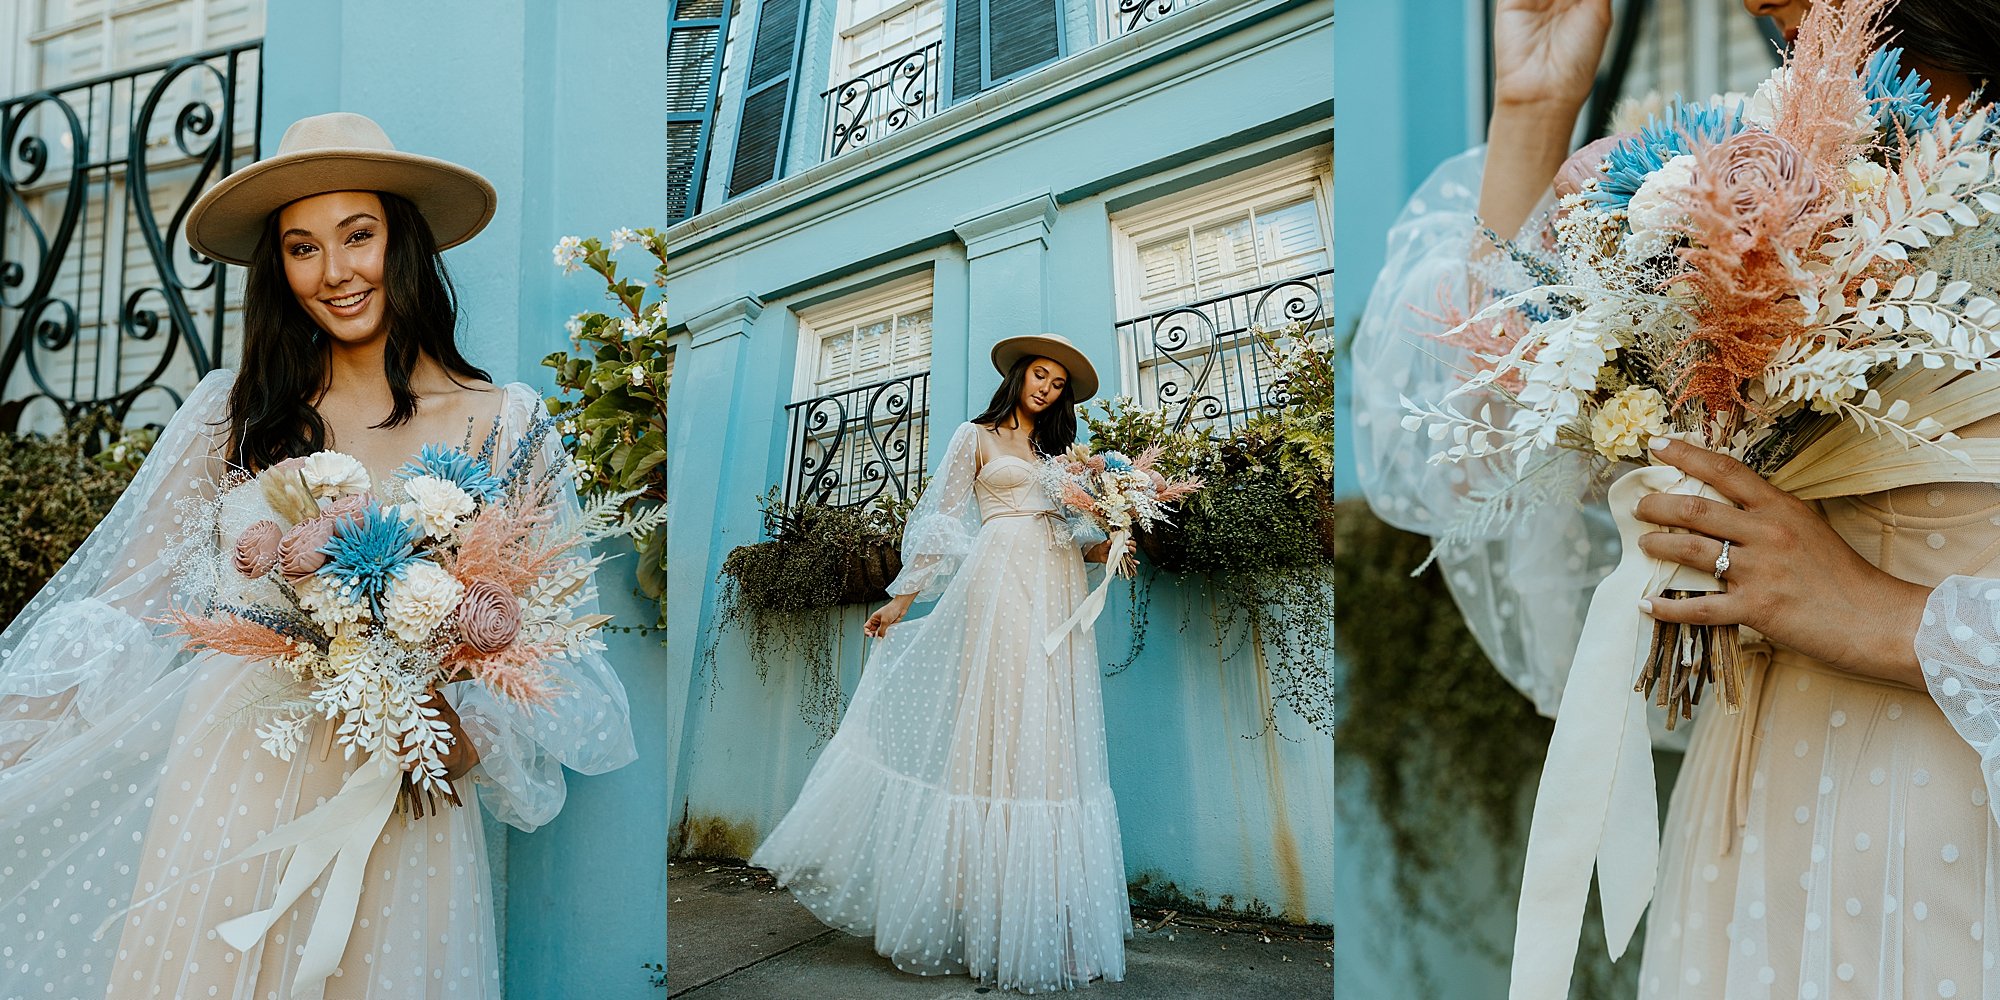 Bridal portraits among the colorful Rainbow Row houses in Charleston SC before her elopement